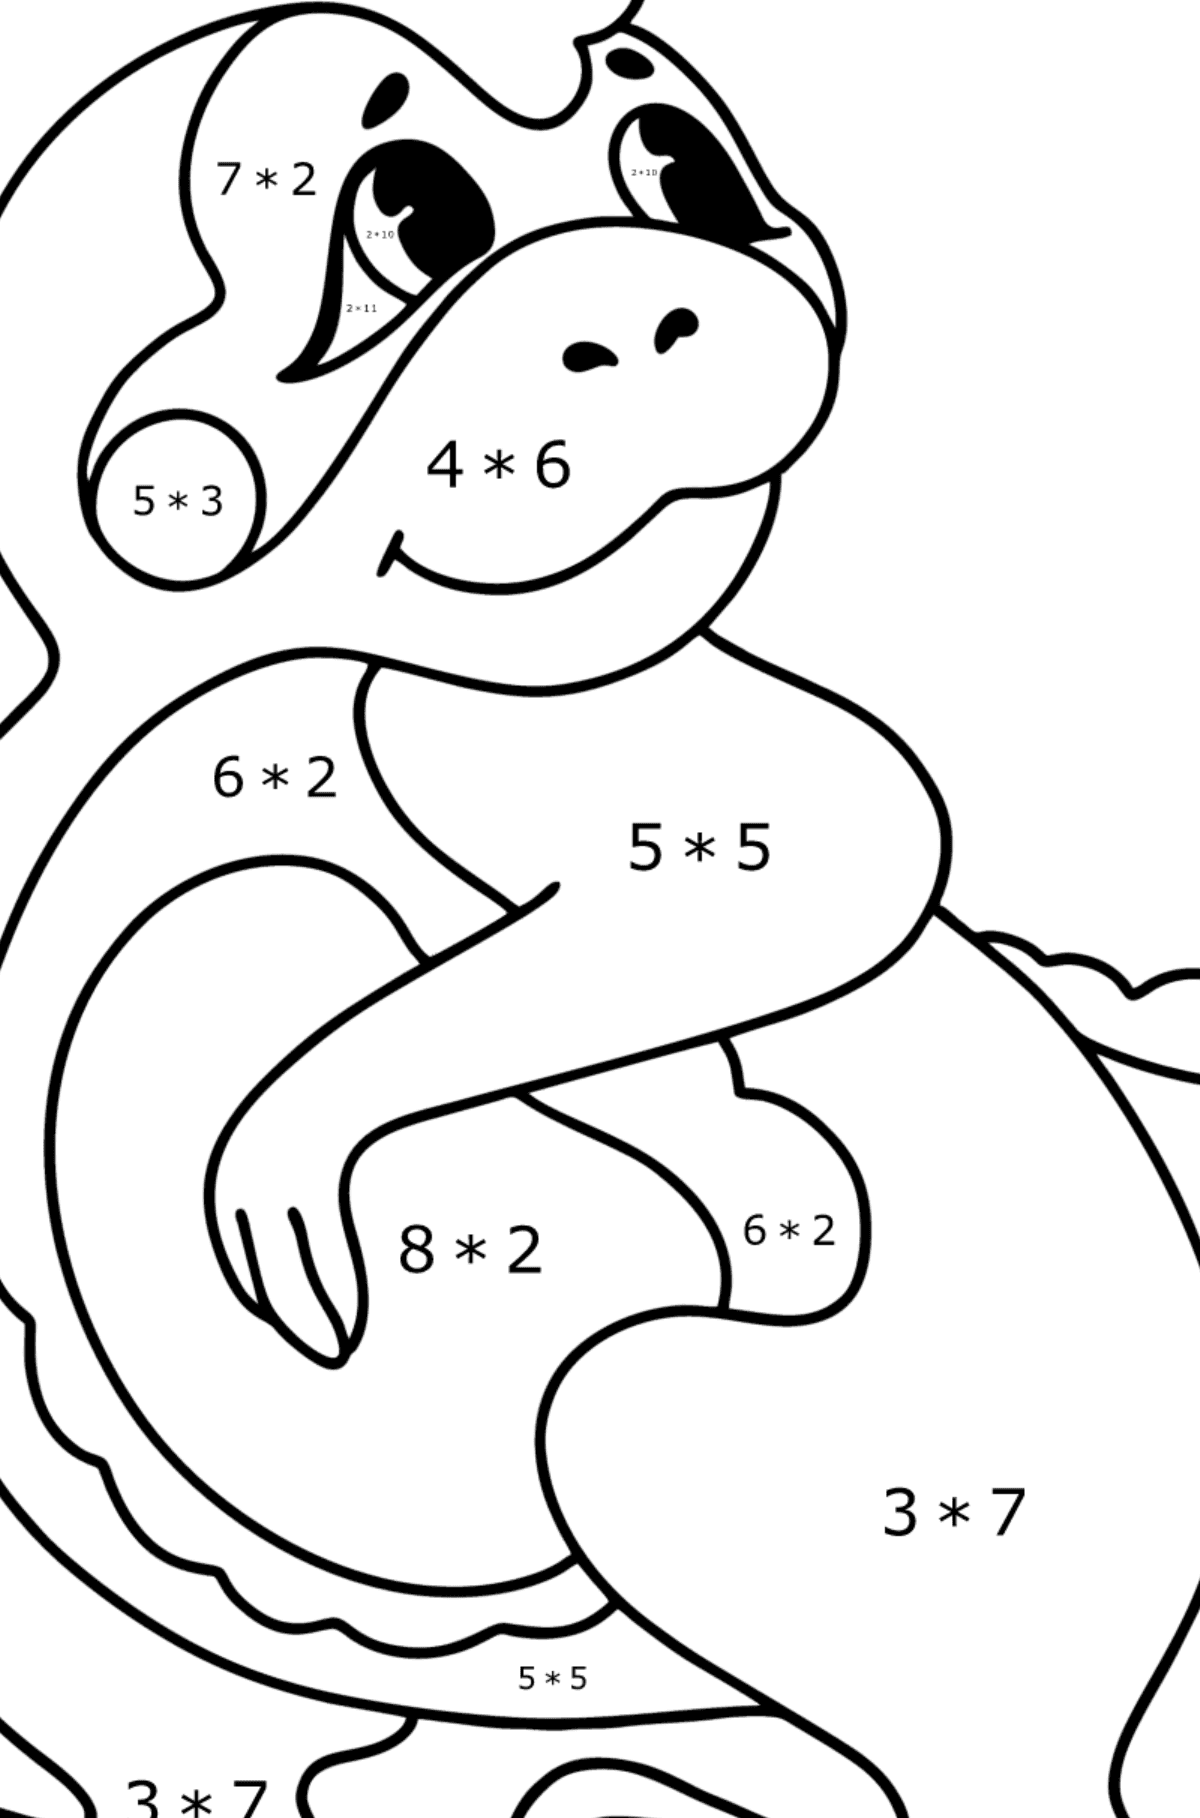 Baby dragon coloring page - Math Coloring - Multiplication for Kids